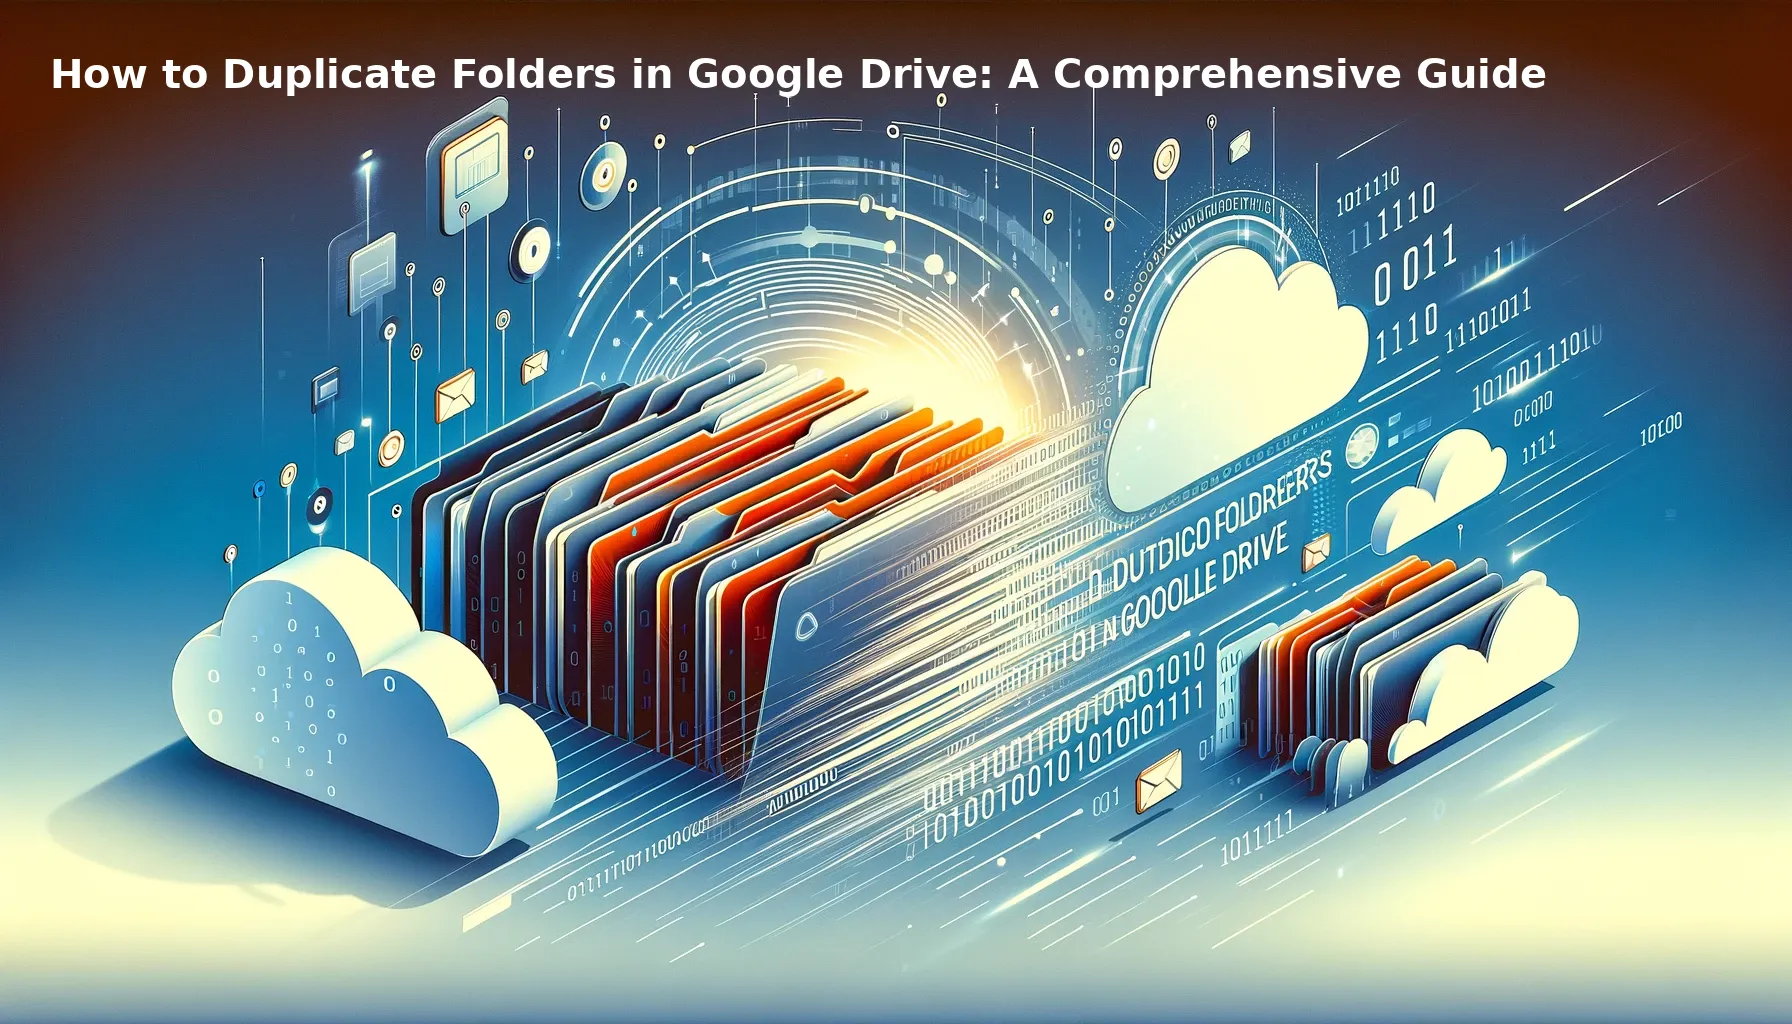 How to Duplicate Folders in Google Drive: A Comprehensive Guide